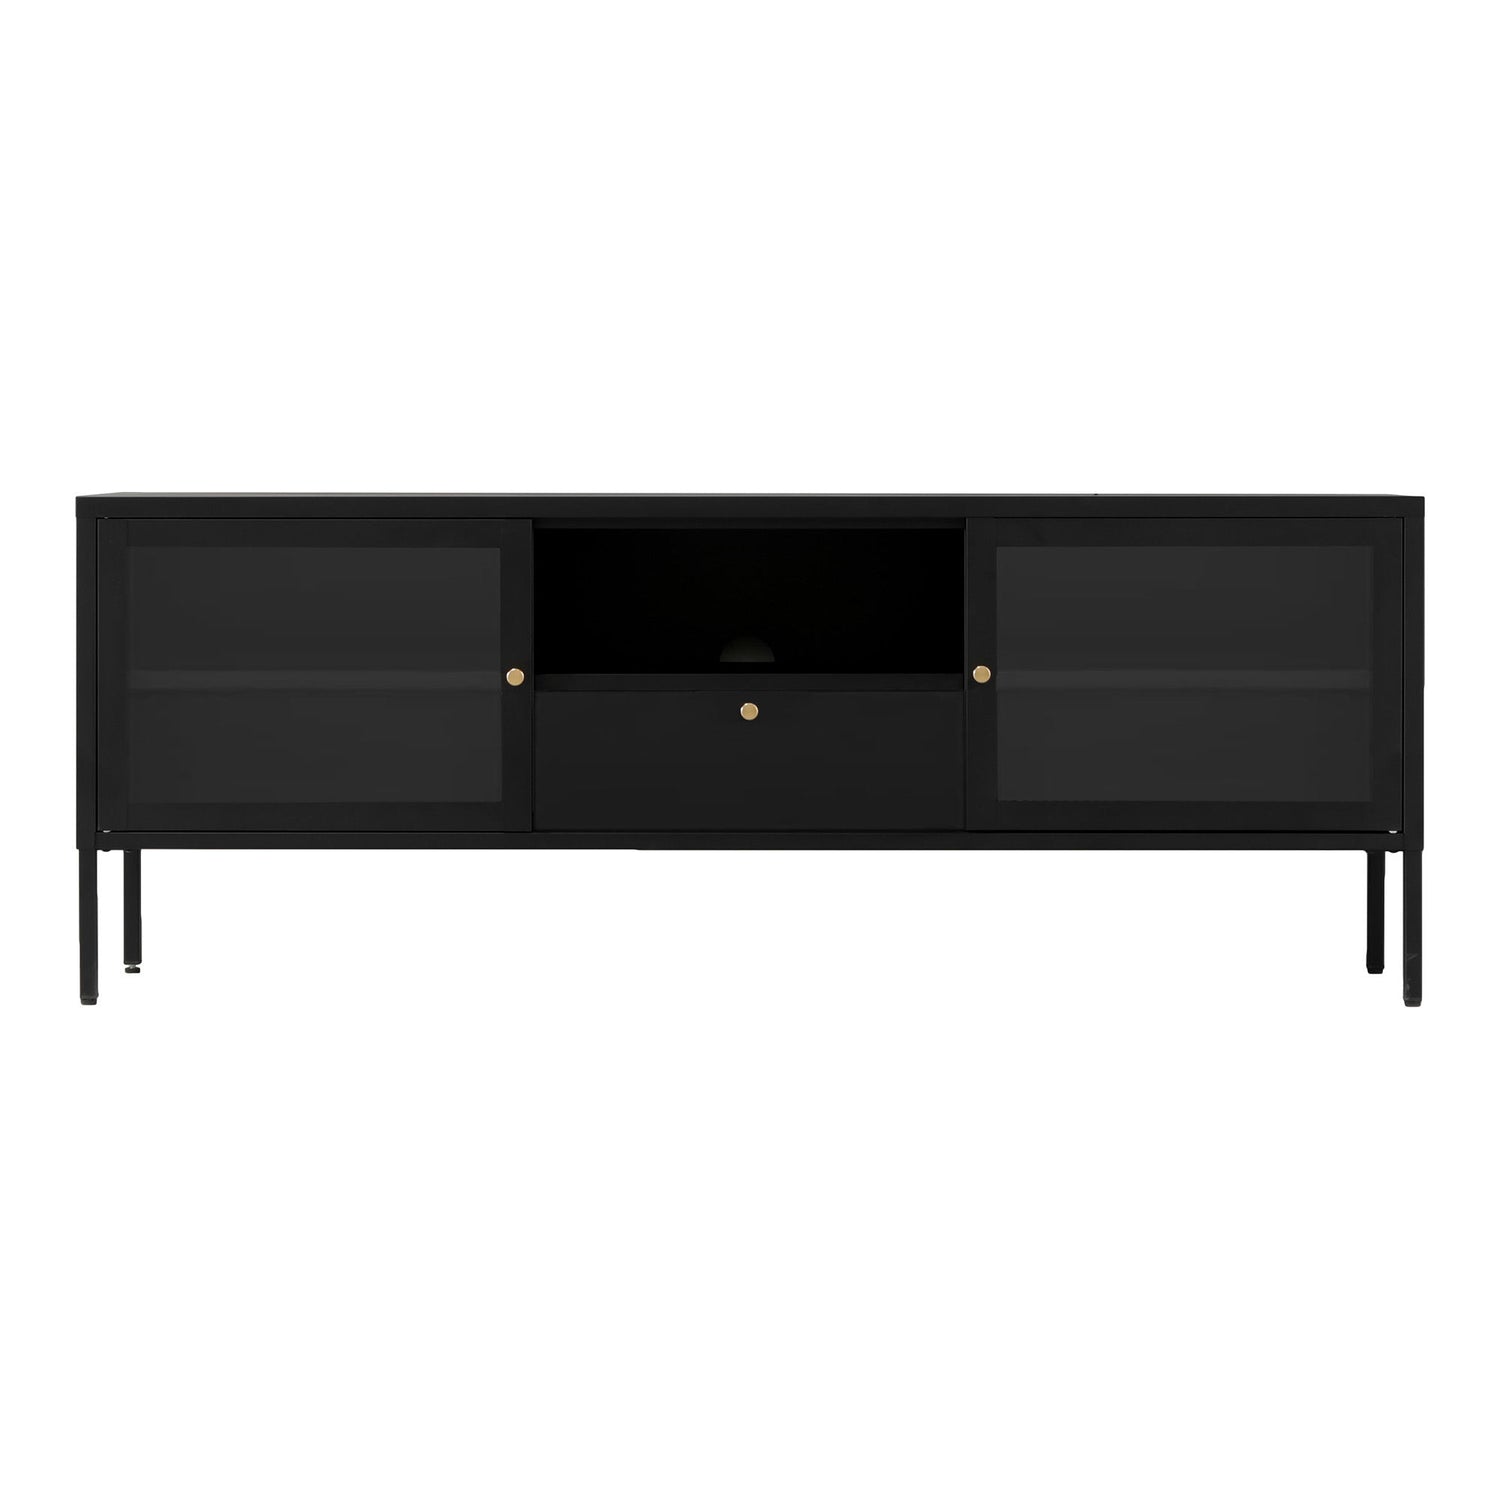 House Nordic Dalby TV bench